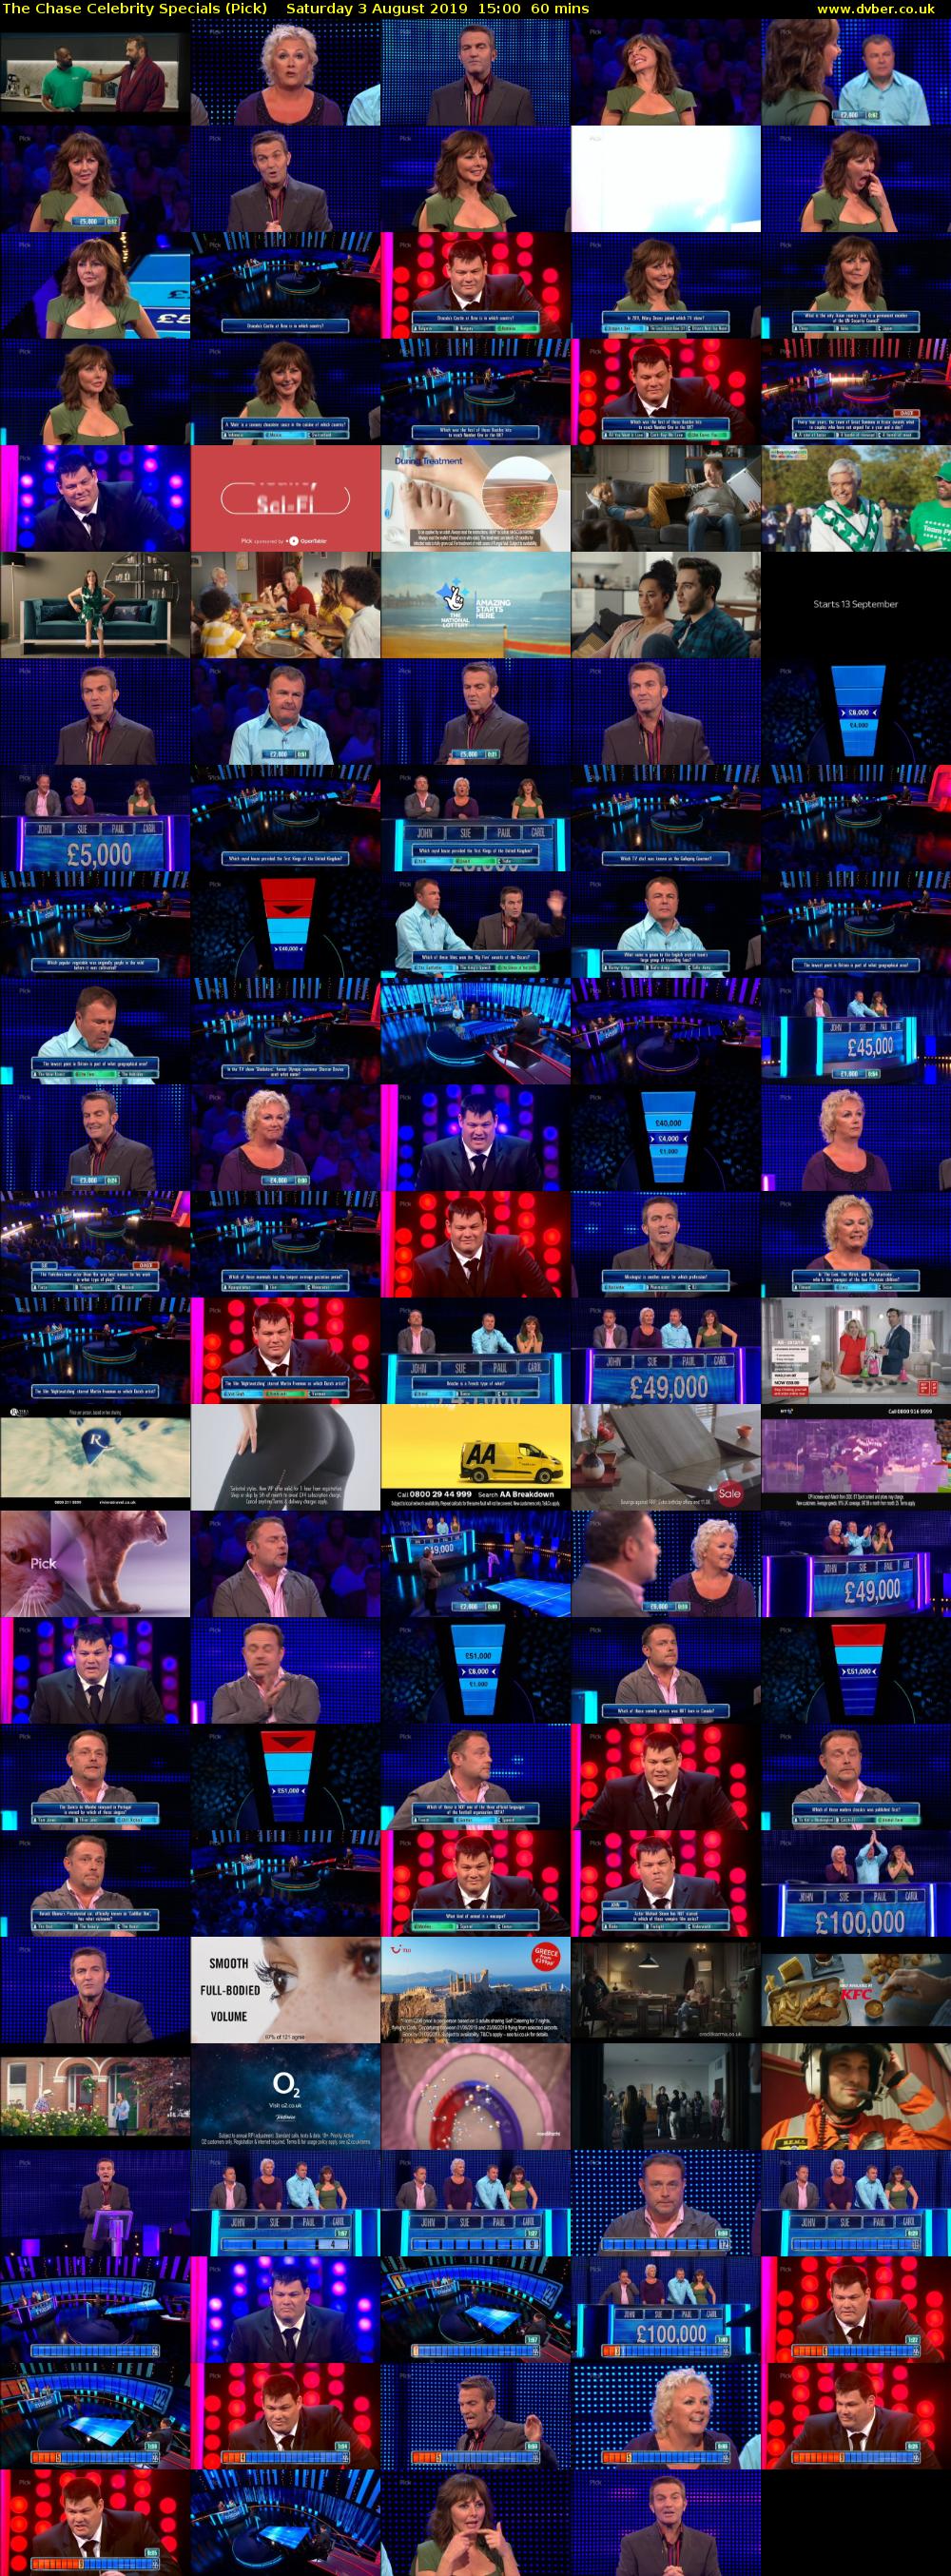 The Chase Celebrity Specials (Pick) Saturday 3 August 2019 15:00 - 16:00